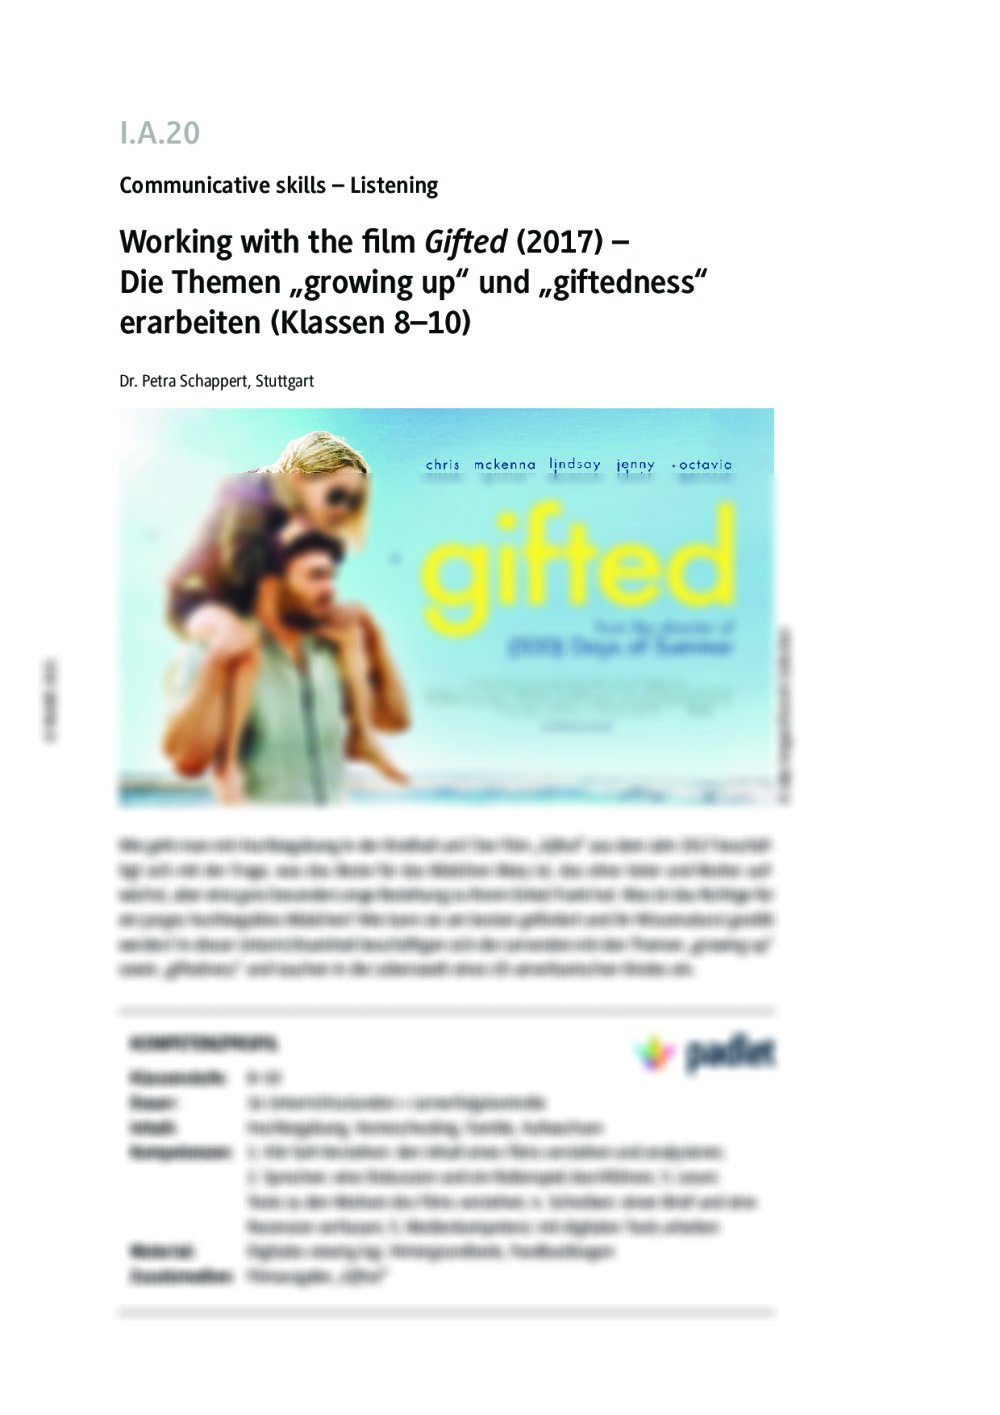 Working with the film "Gifted" (2017) - Seite 1